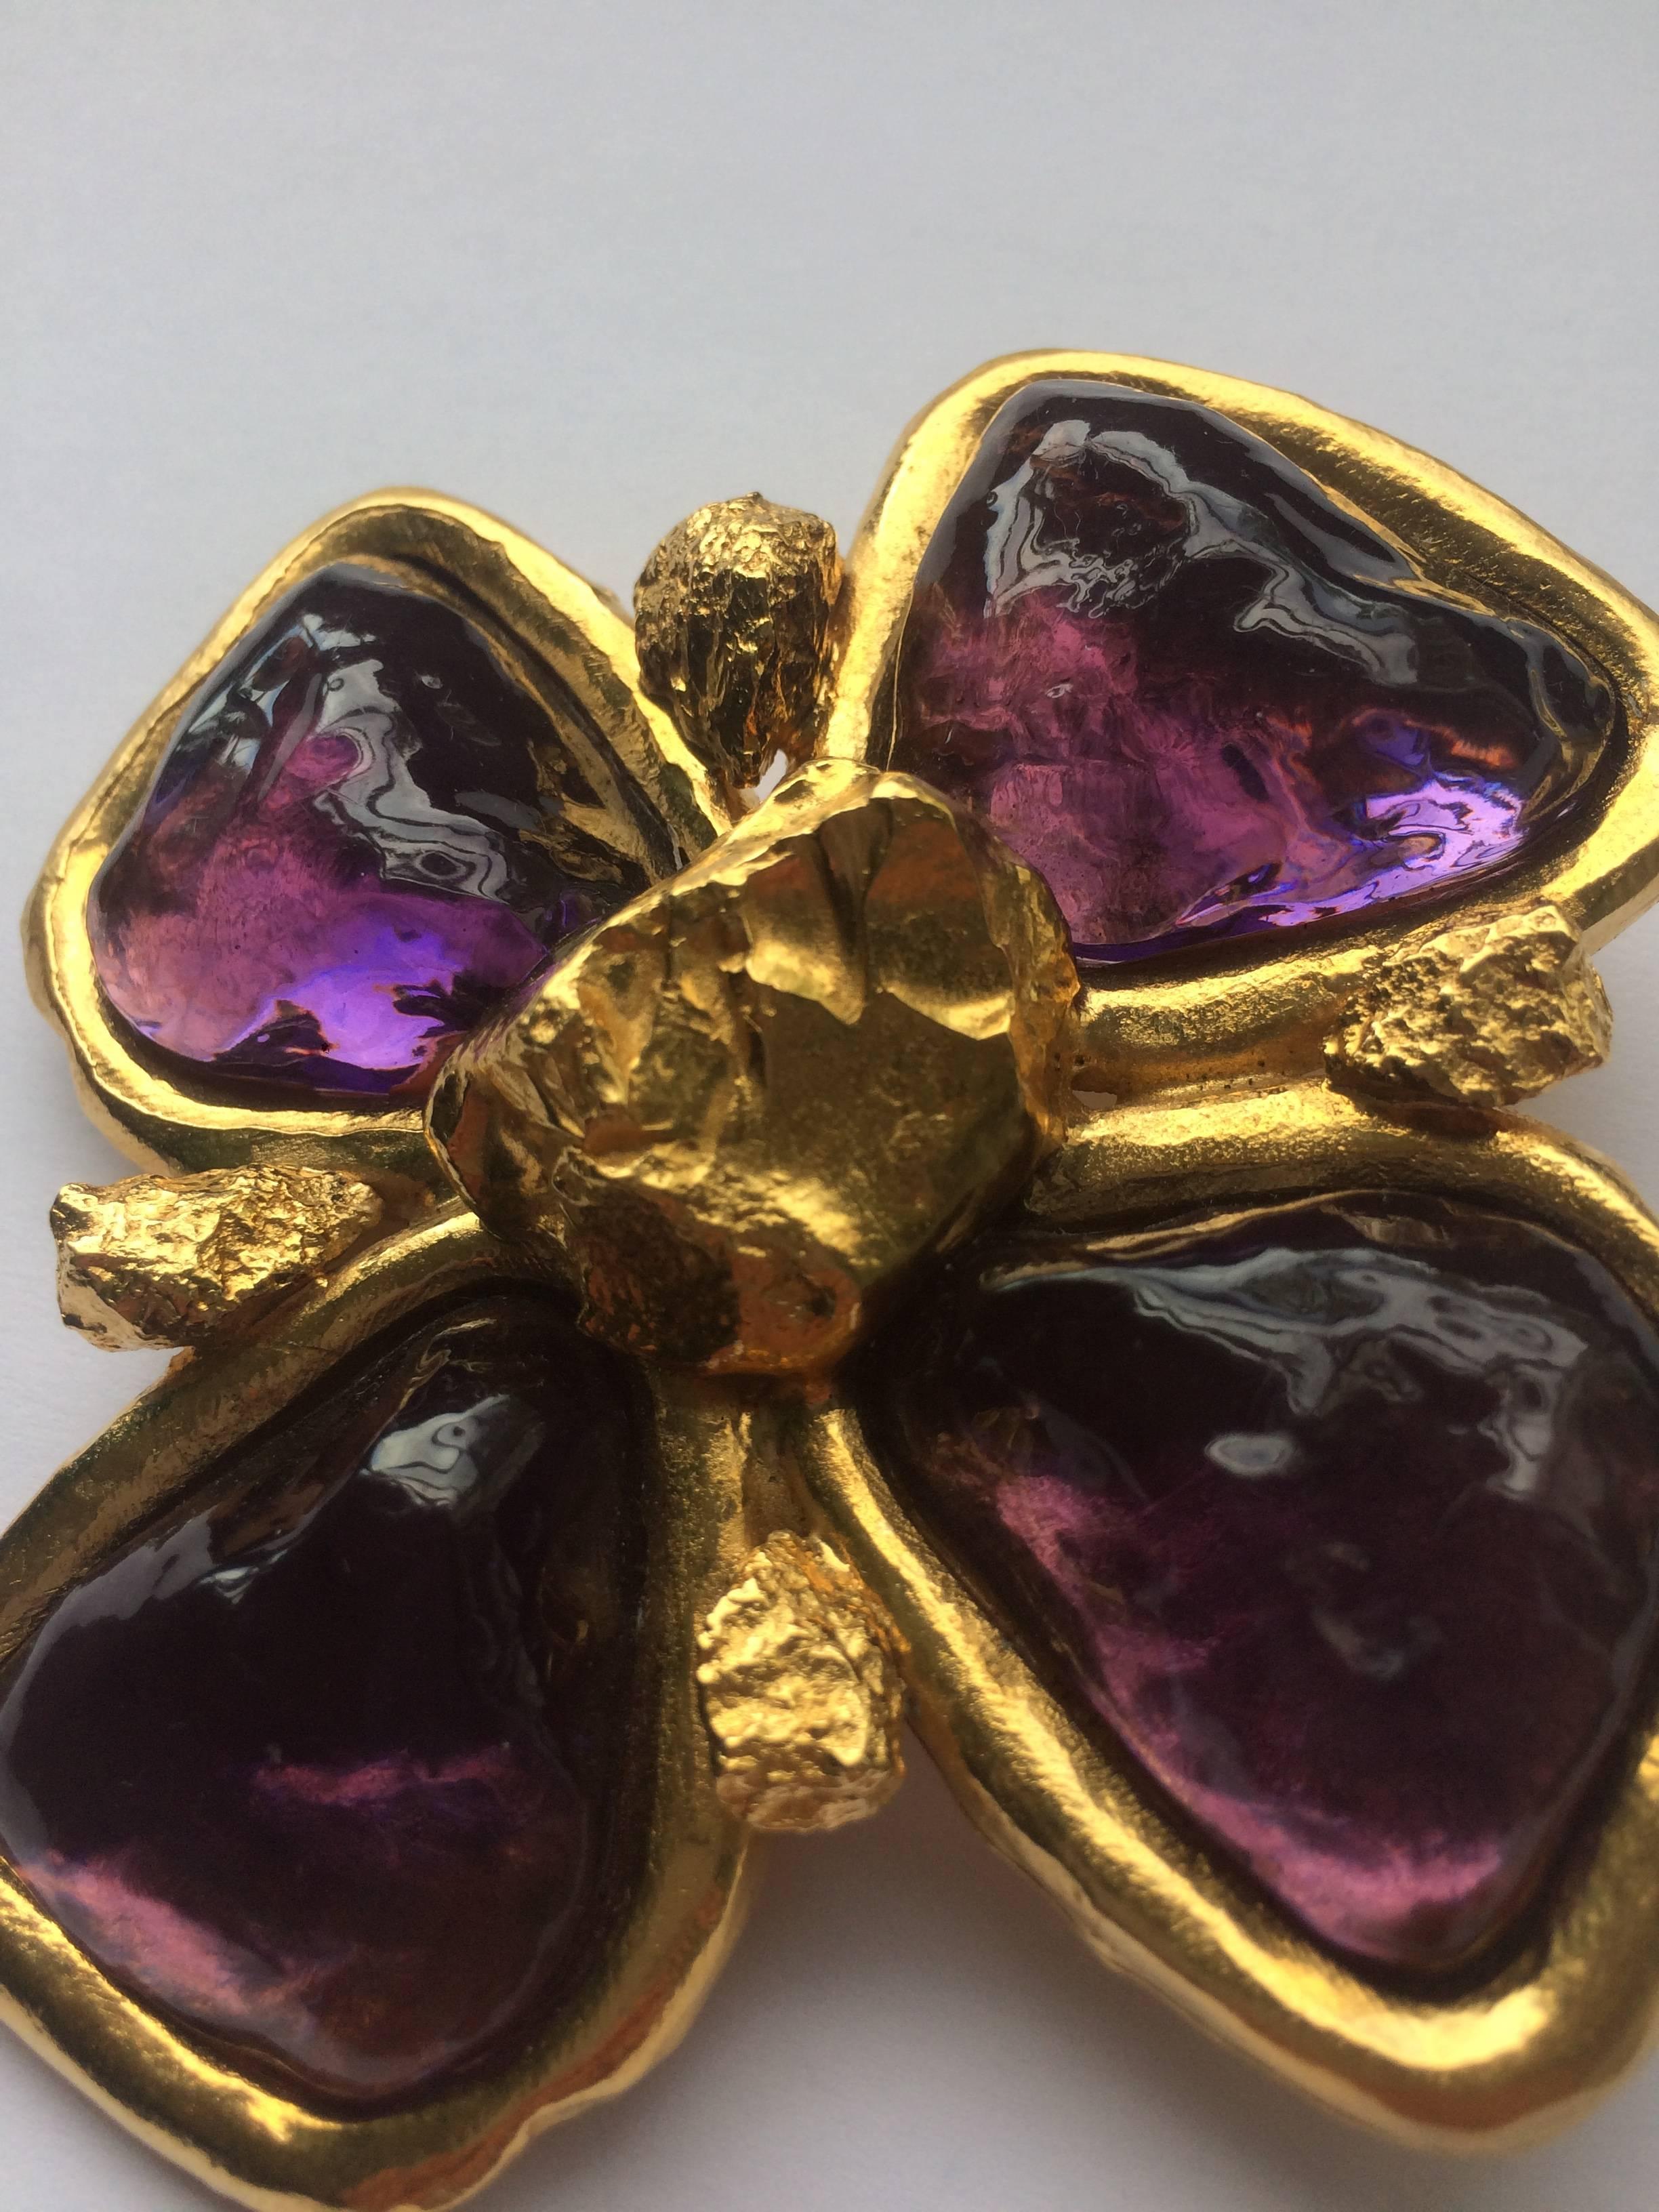 Very large gilt metal brooch with resin panels of amethyst, and gilt 'nugget' highlights. A classic design from the 1980s collections, made by Robert Goossens' atelier for Yves Saint Laurent. The brooch can also be worn as a pendant, as there is a